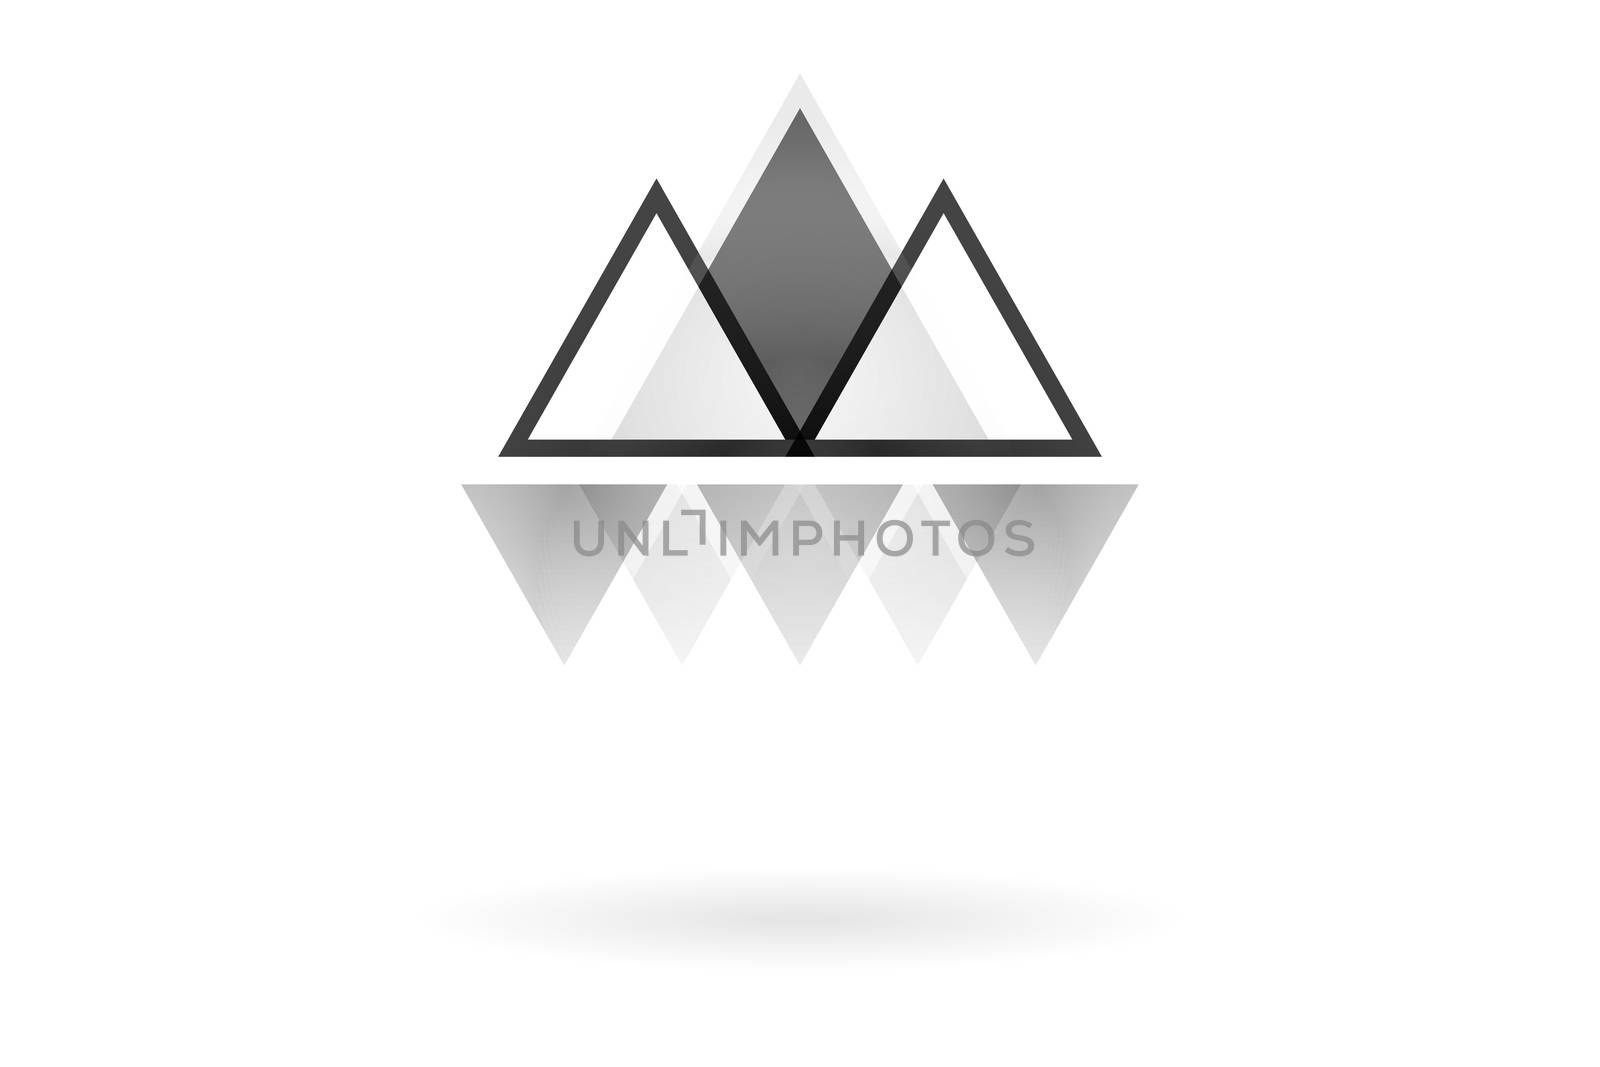 Abstract geometric pattern, monochrome overlapping triangle mountain logo